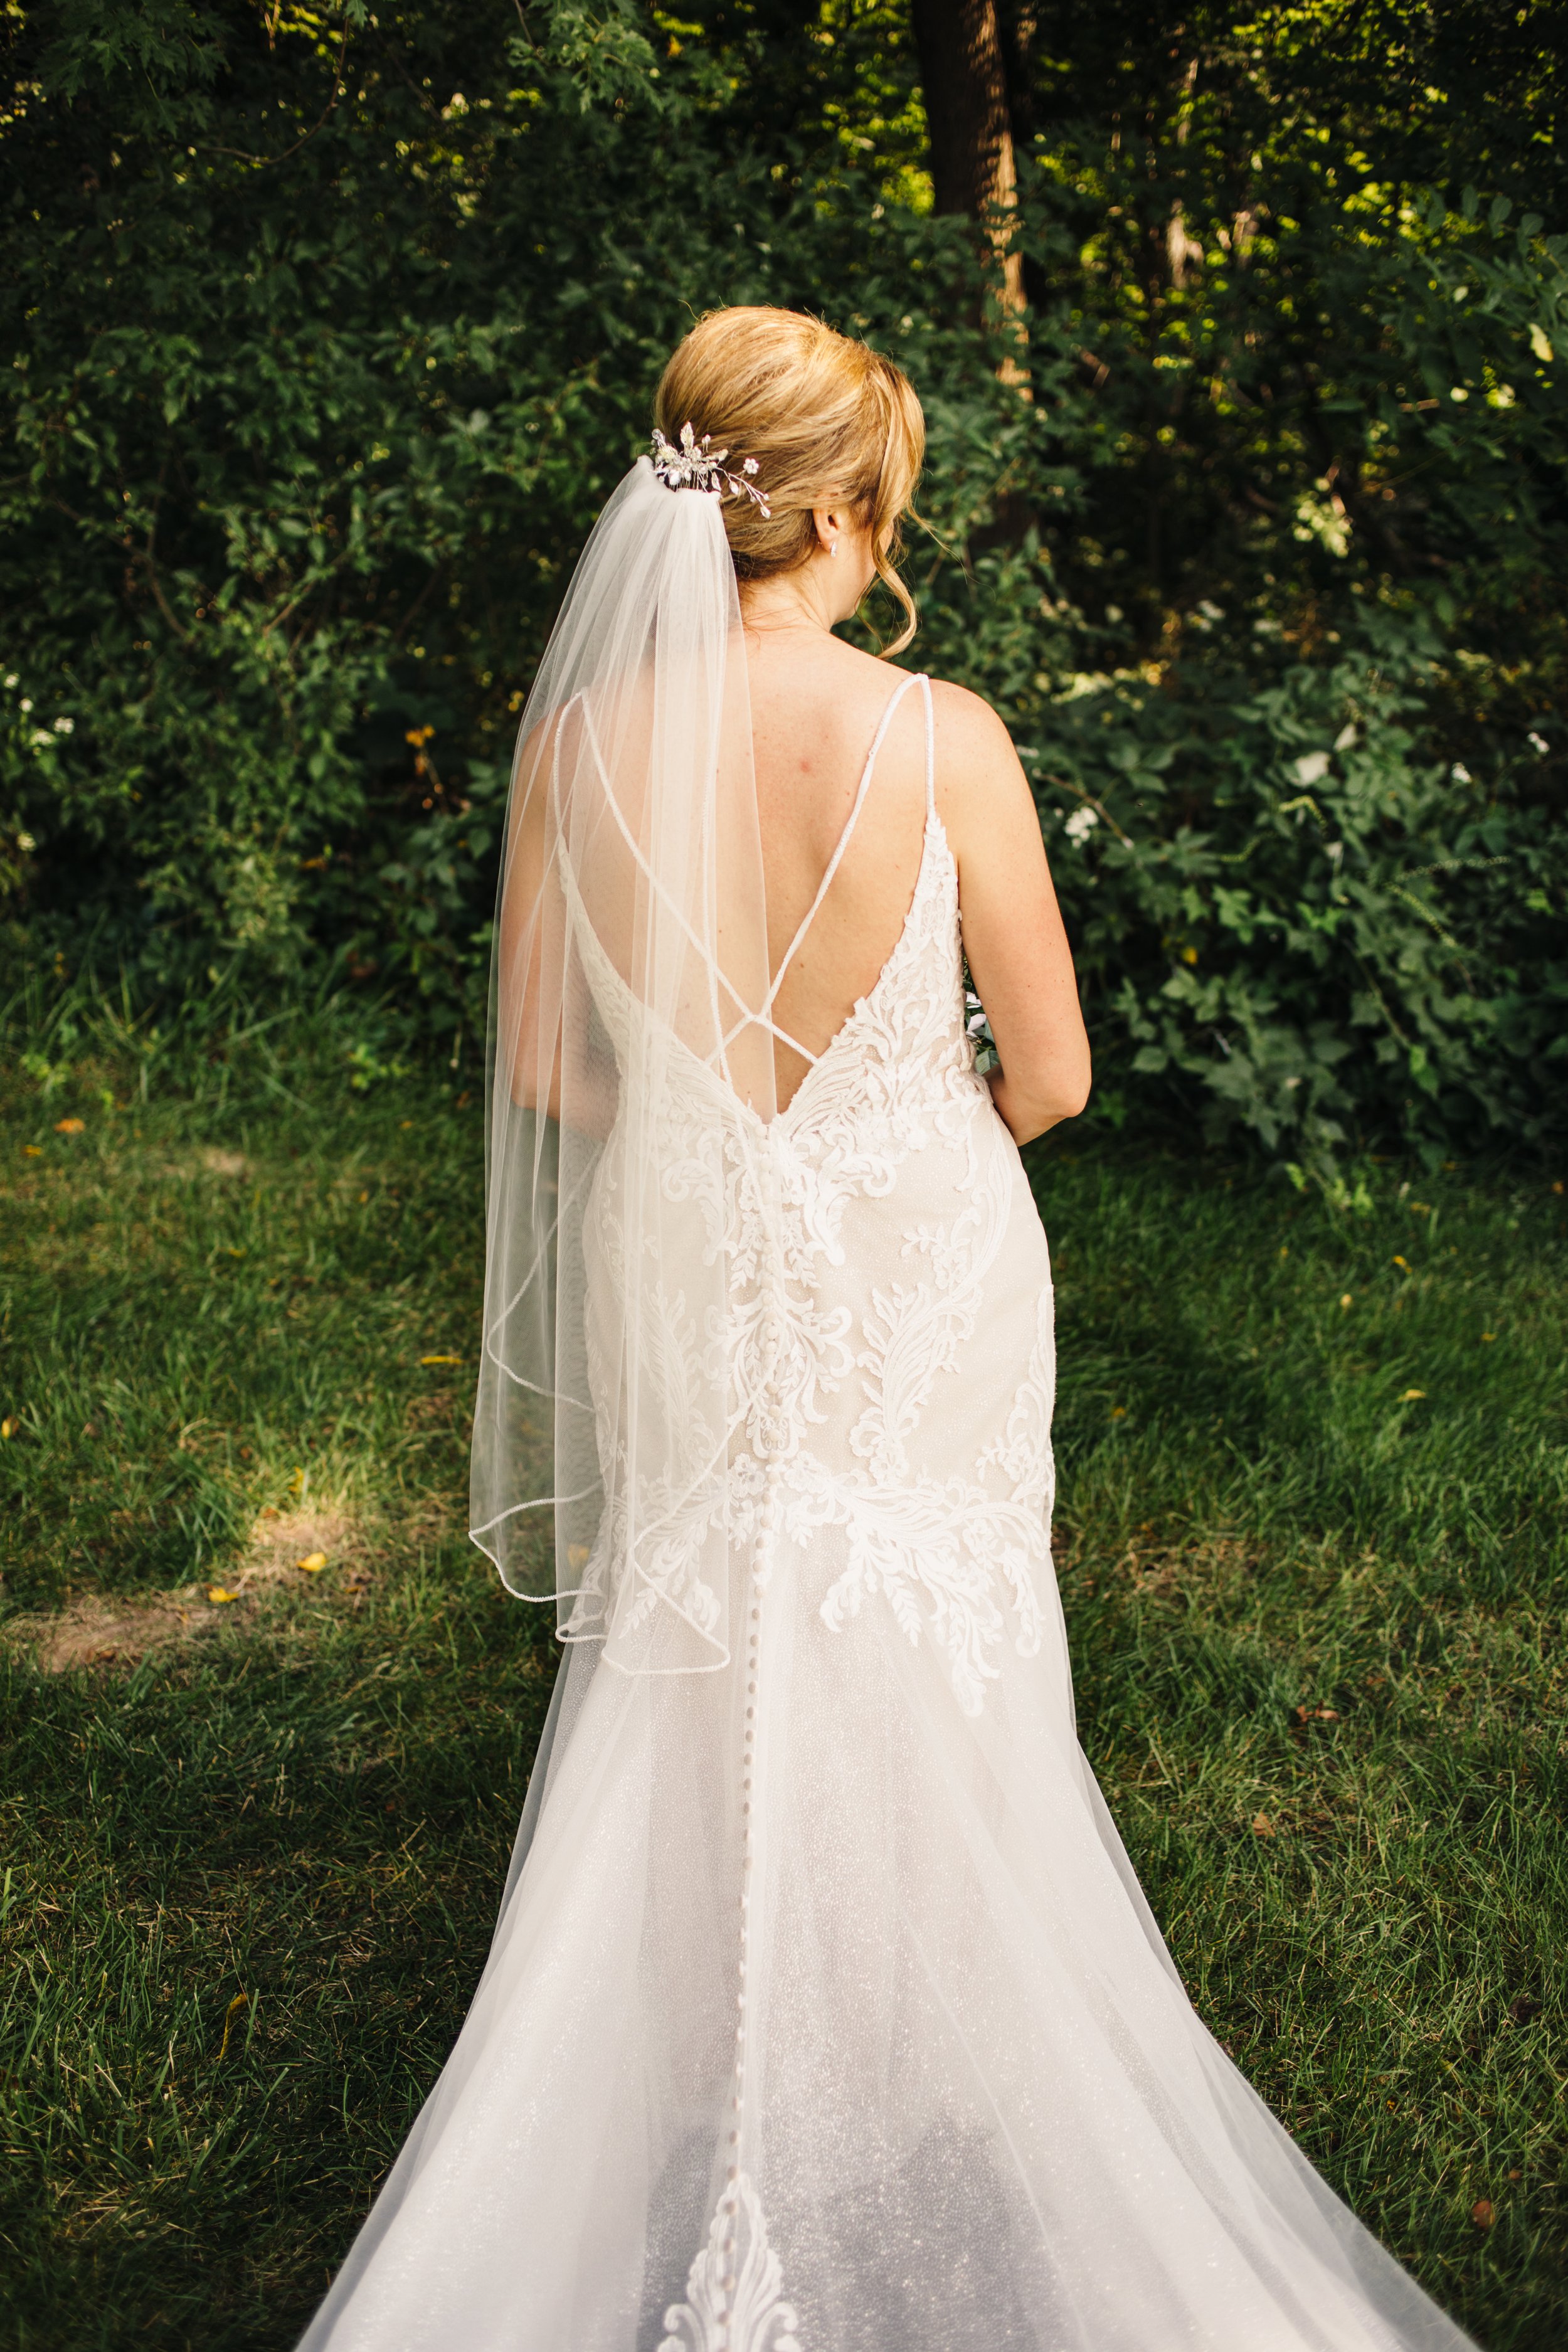  A bride with a sheer veil and strappy back with buttons all the way down by Teala Ward Photography. button down dress wedding dress summer #TealaWardPhotography #IllinoisValleyPhotographer #summerwedding #TealaWardWeddings #Illinoisweddings  